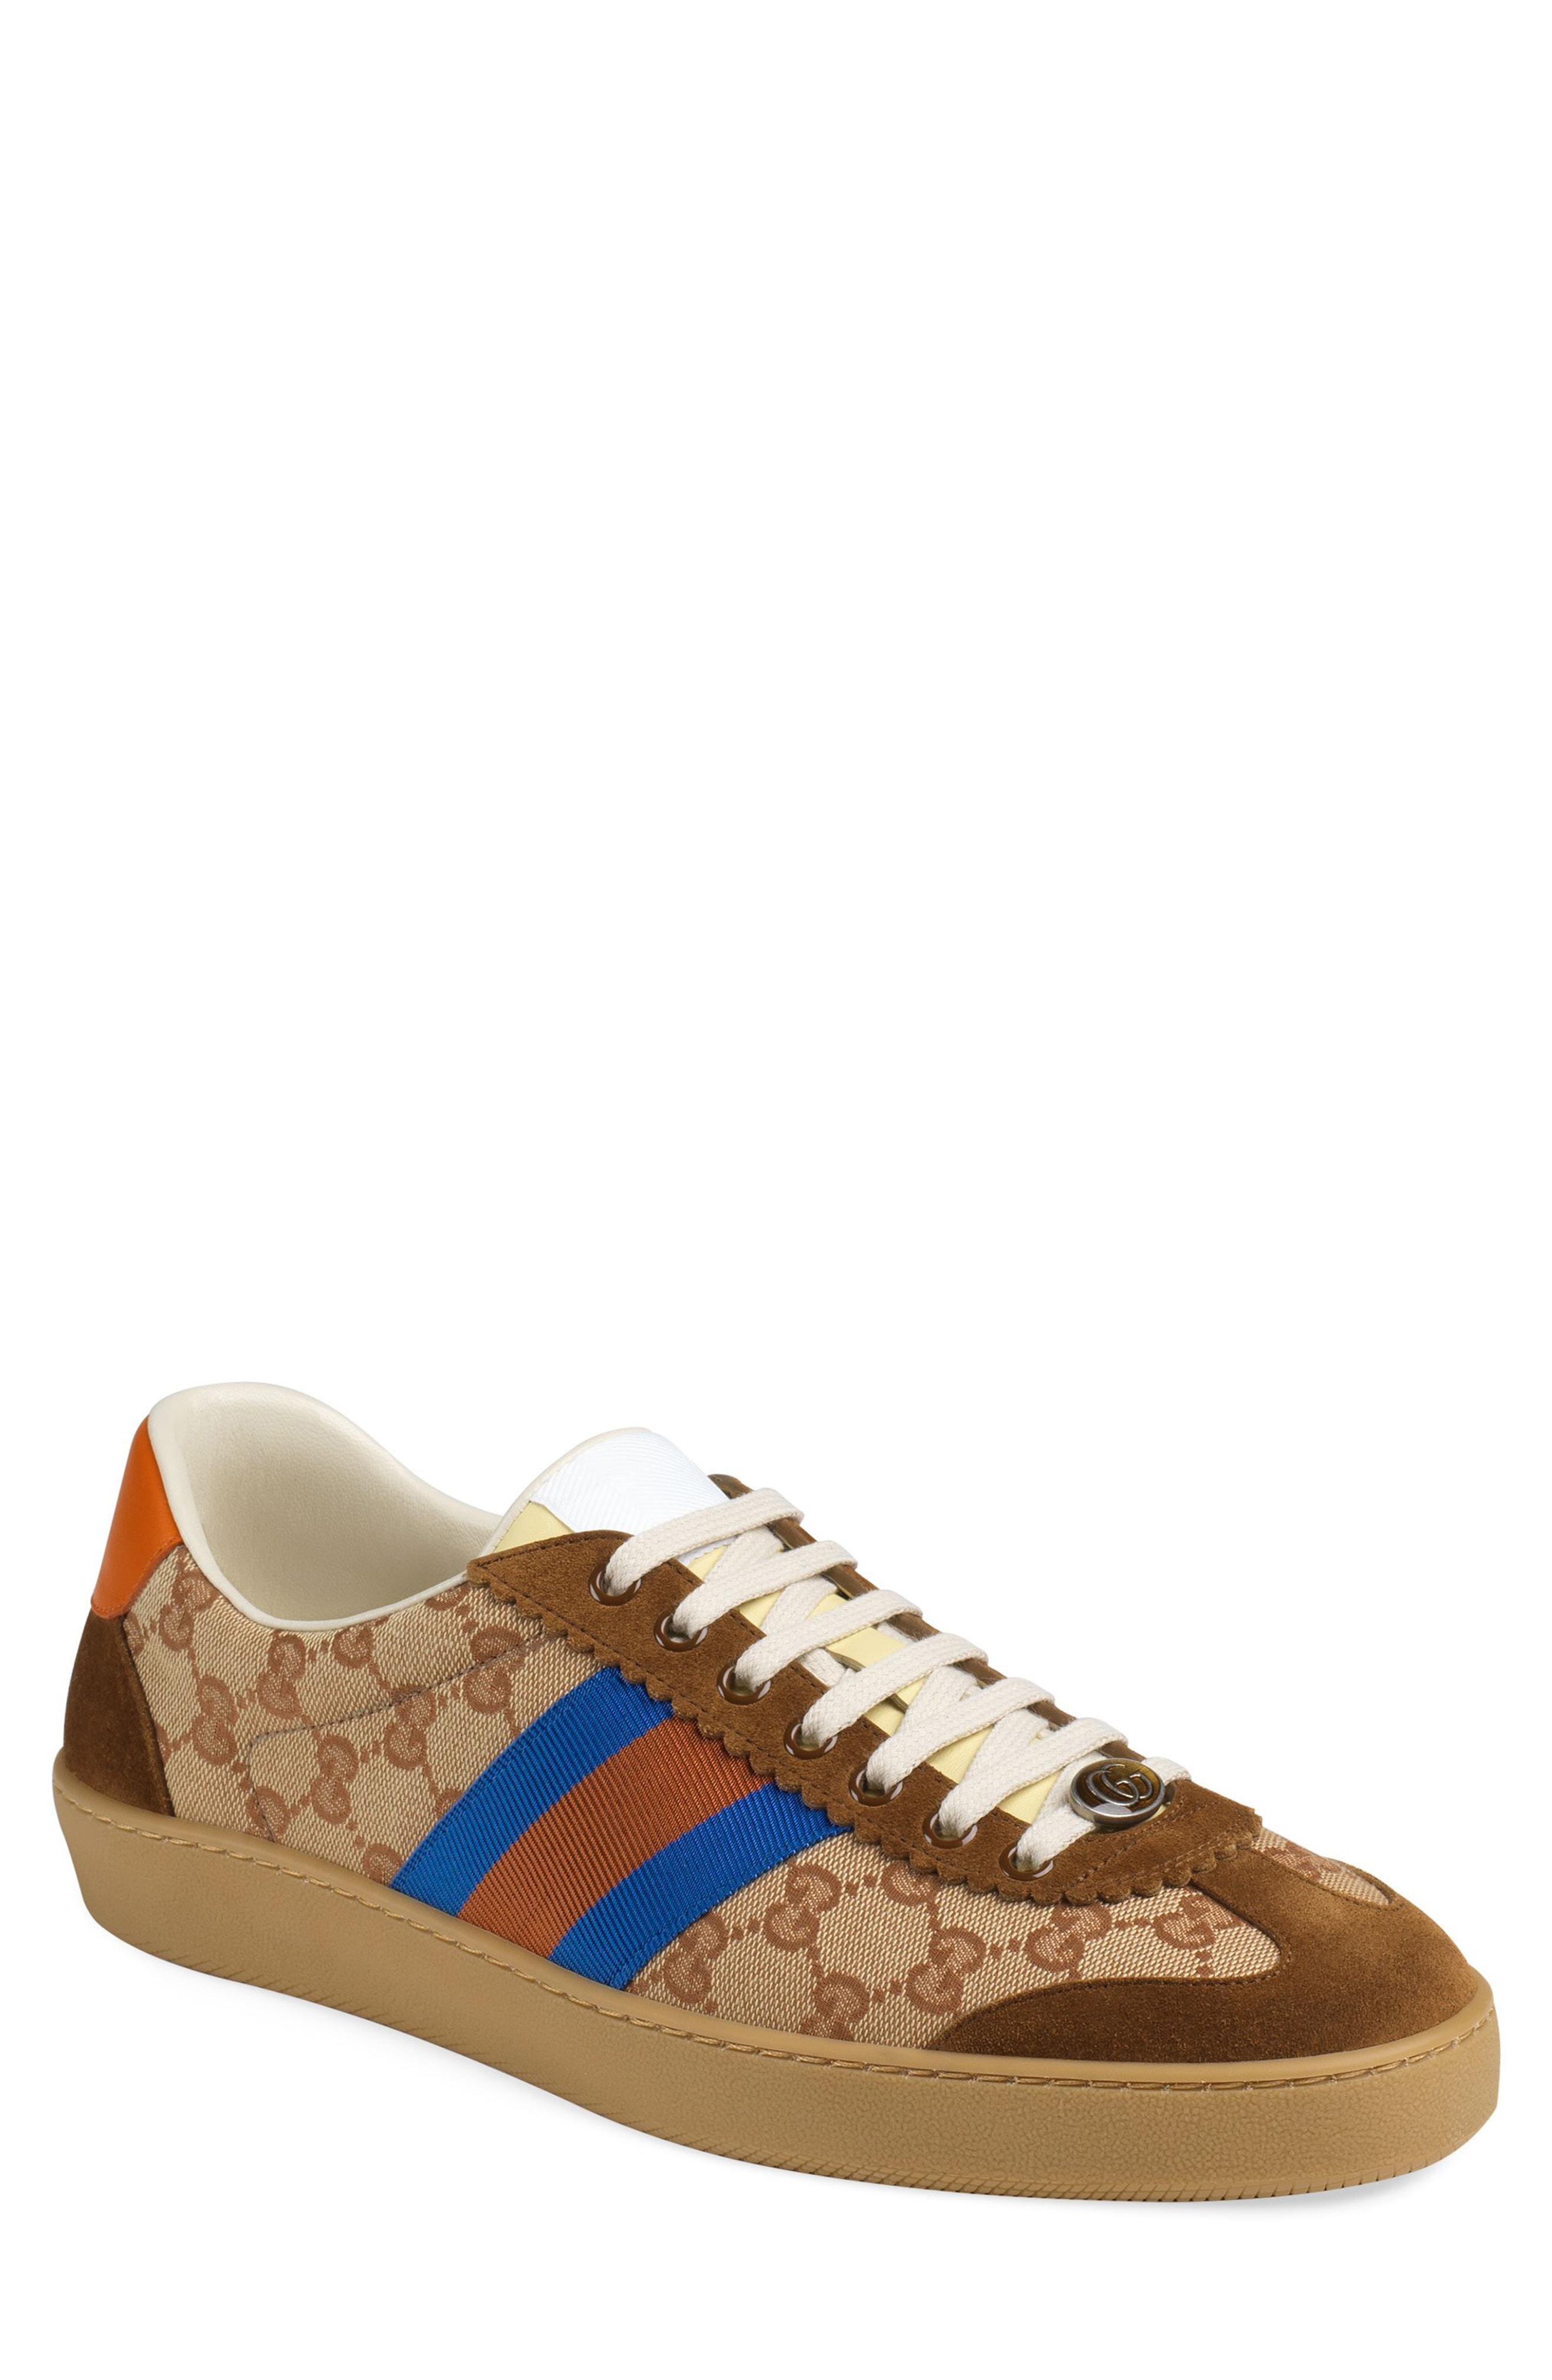 Gucci Brown, Orange And Blue Original GG And Suede Web Sneakers for Men ...